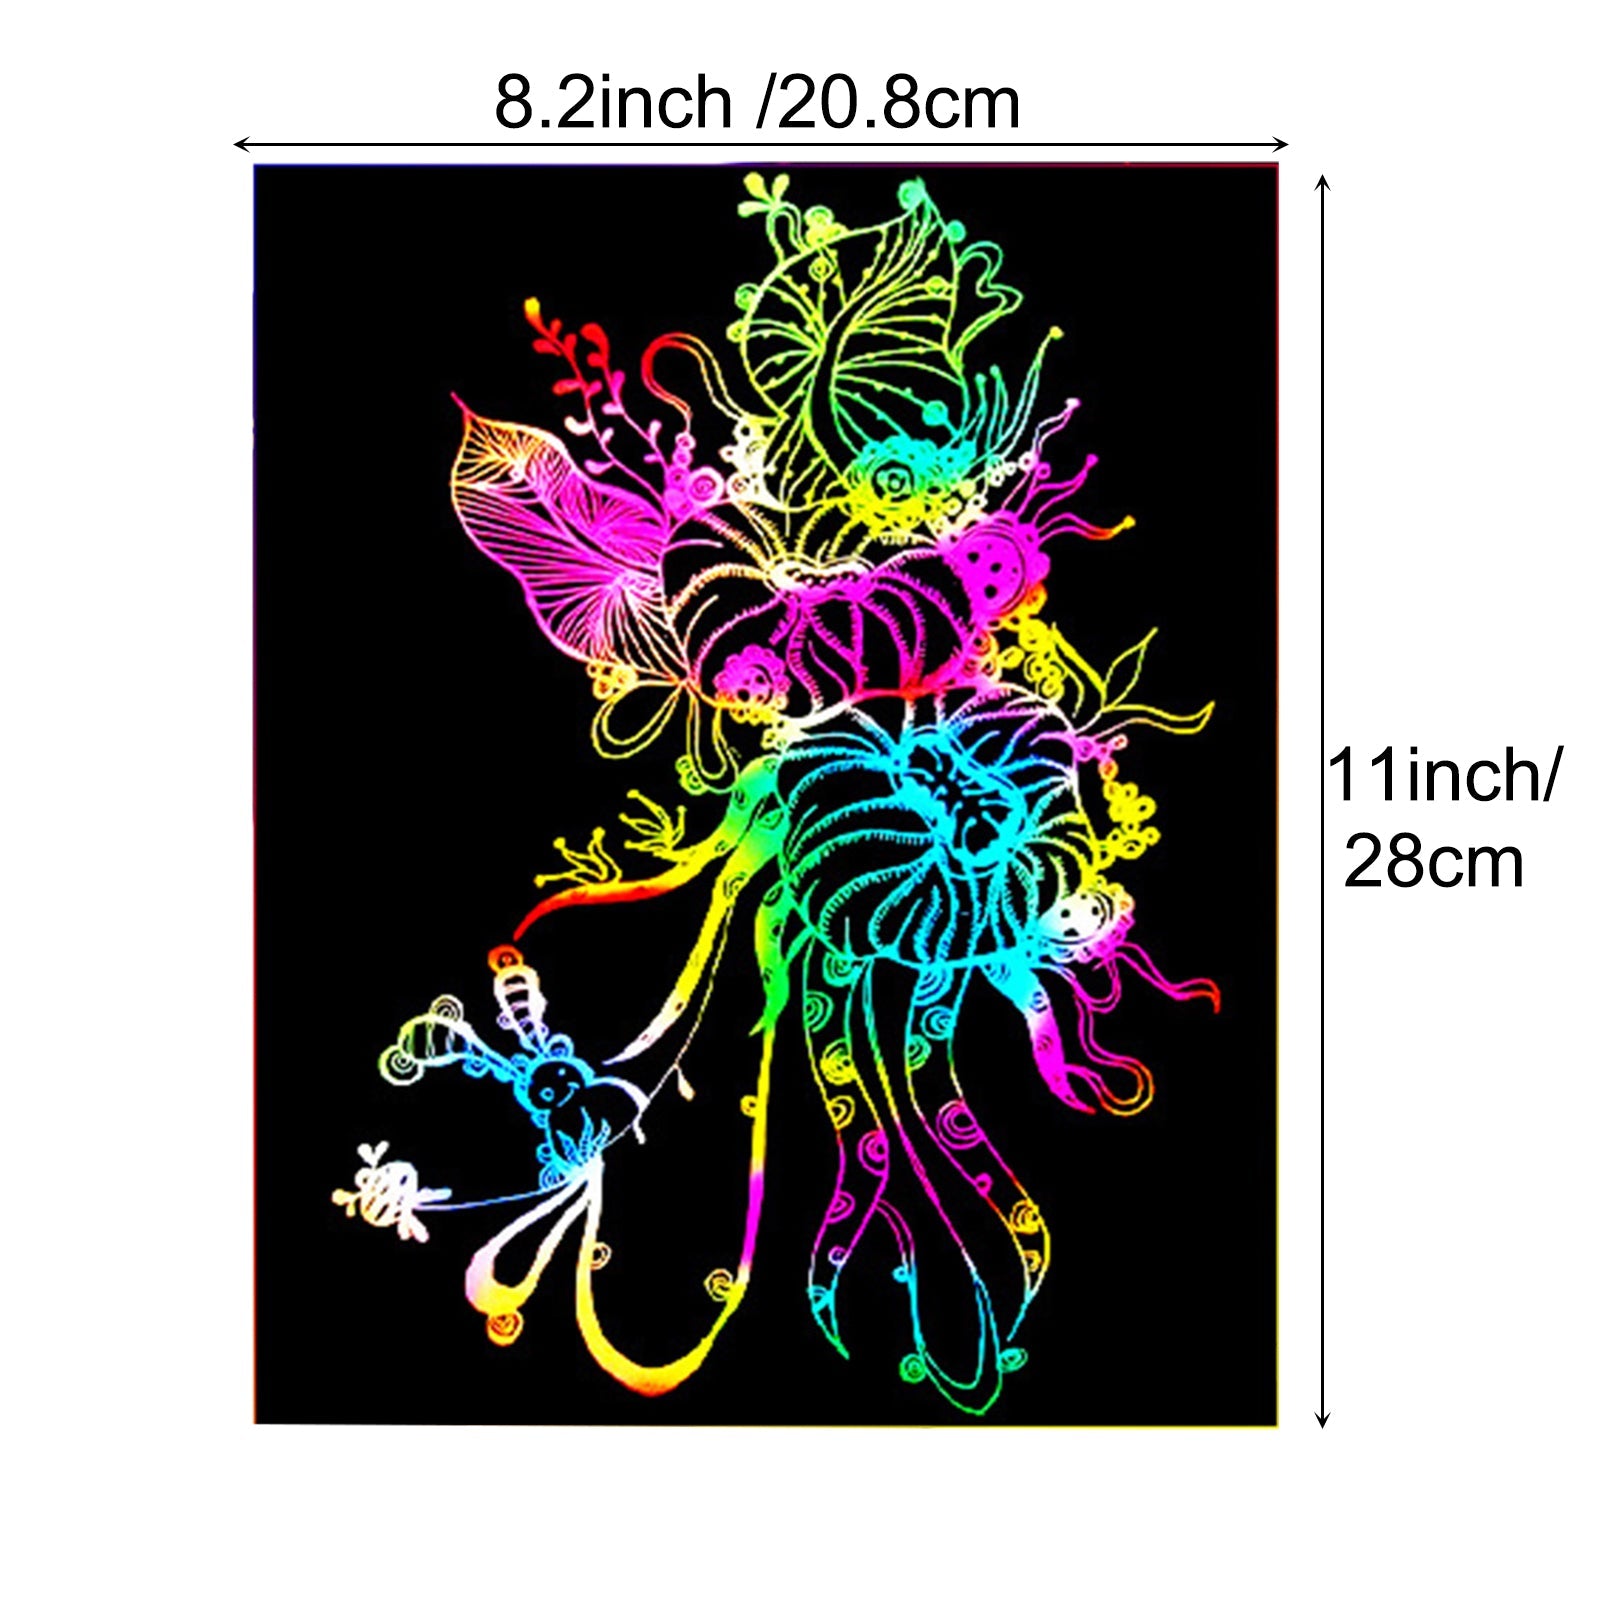 50 Sheets A4 Magic Scratch Paper Crafts Scratch Art Painting Paper Drawing Toys Gifts